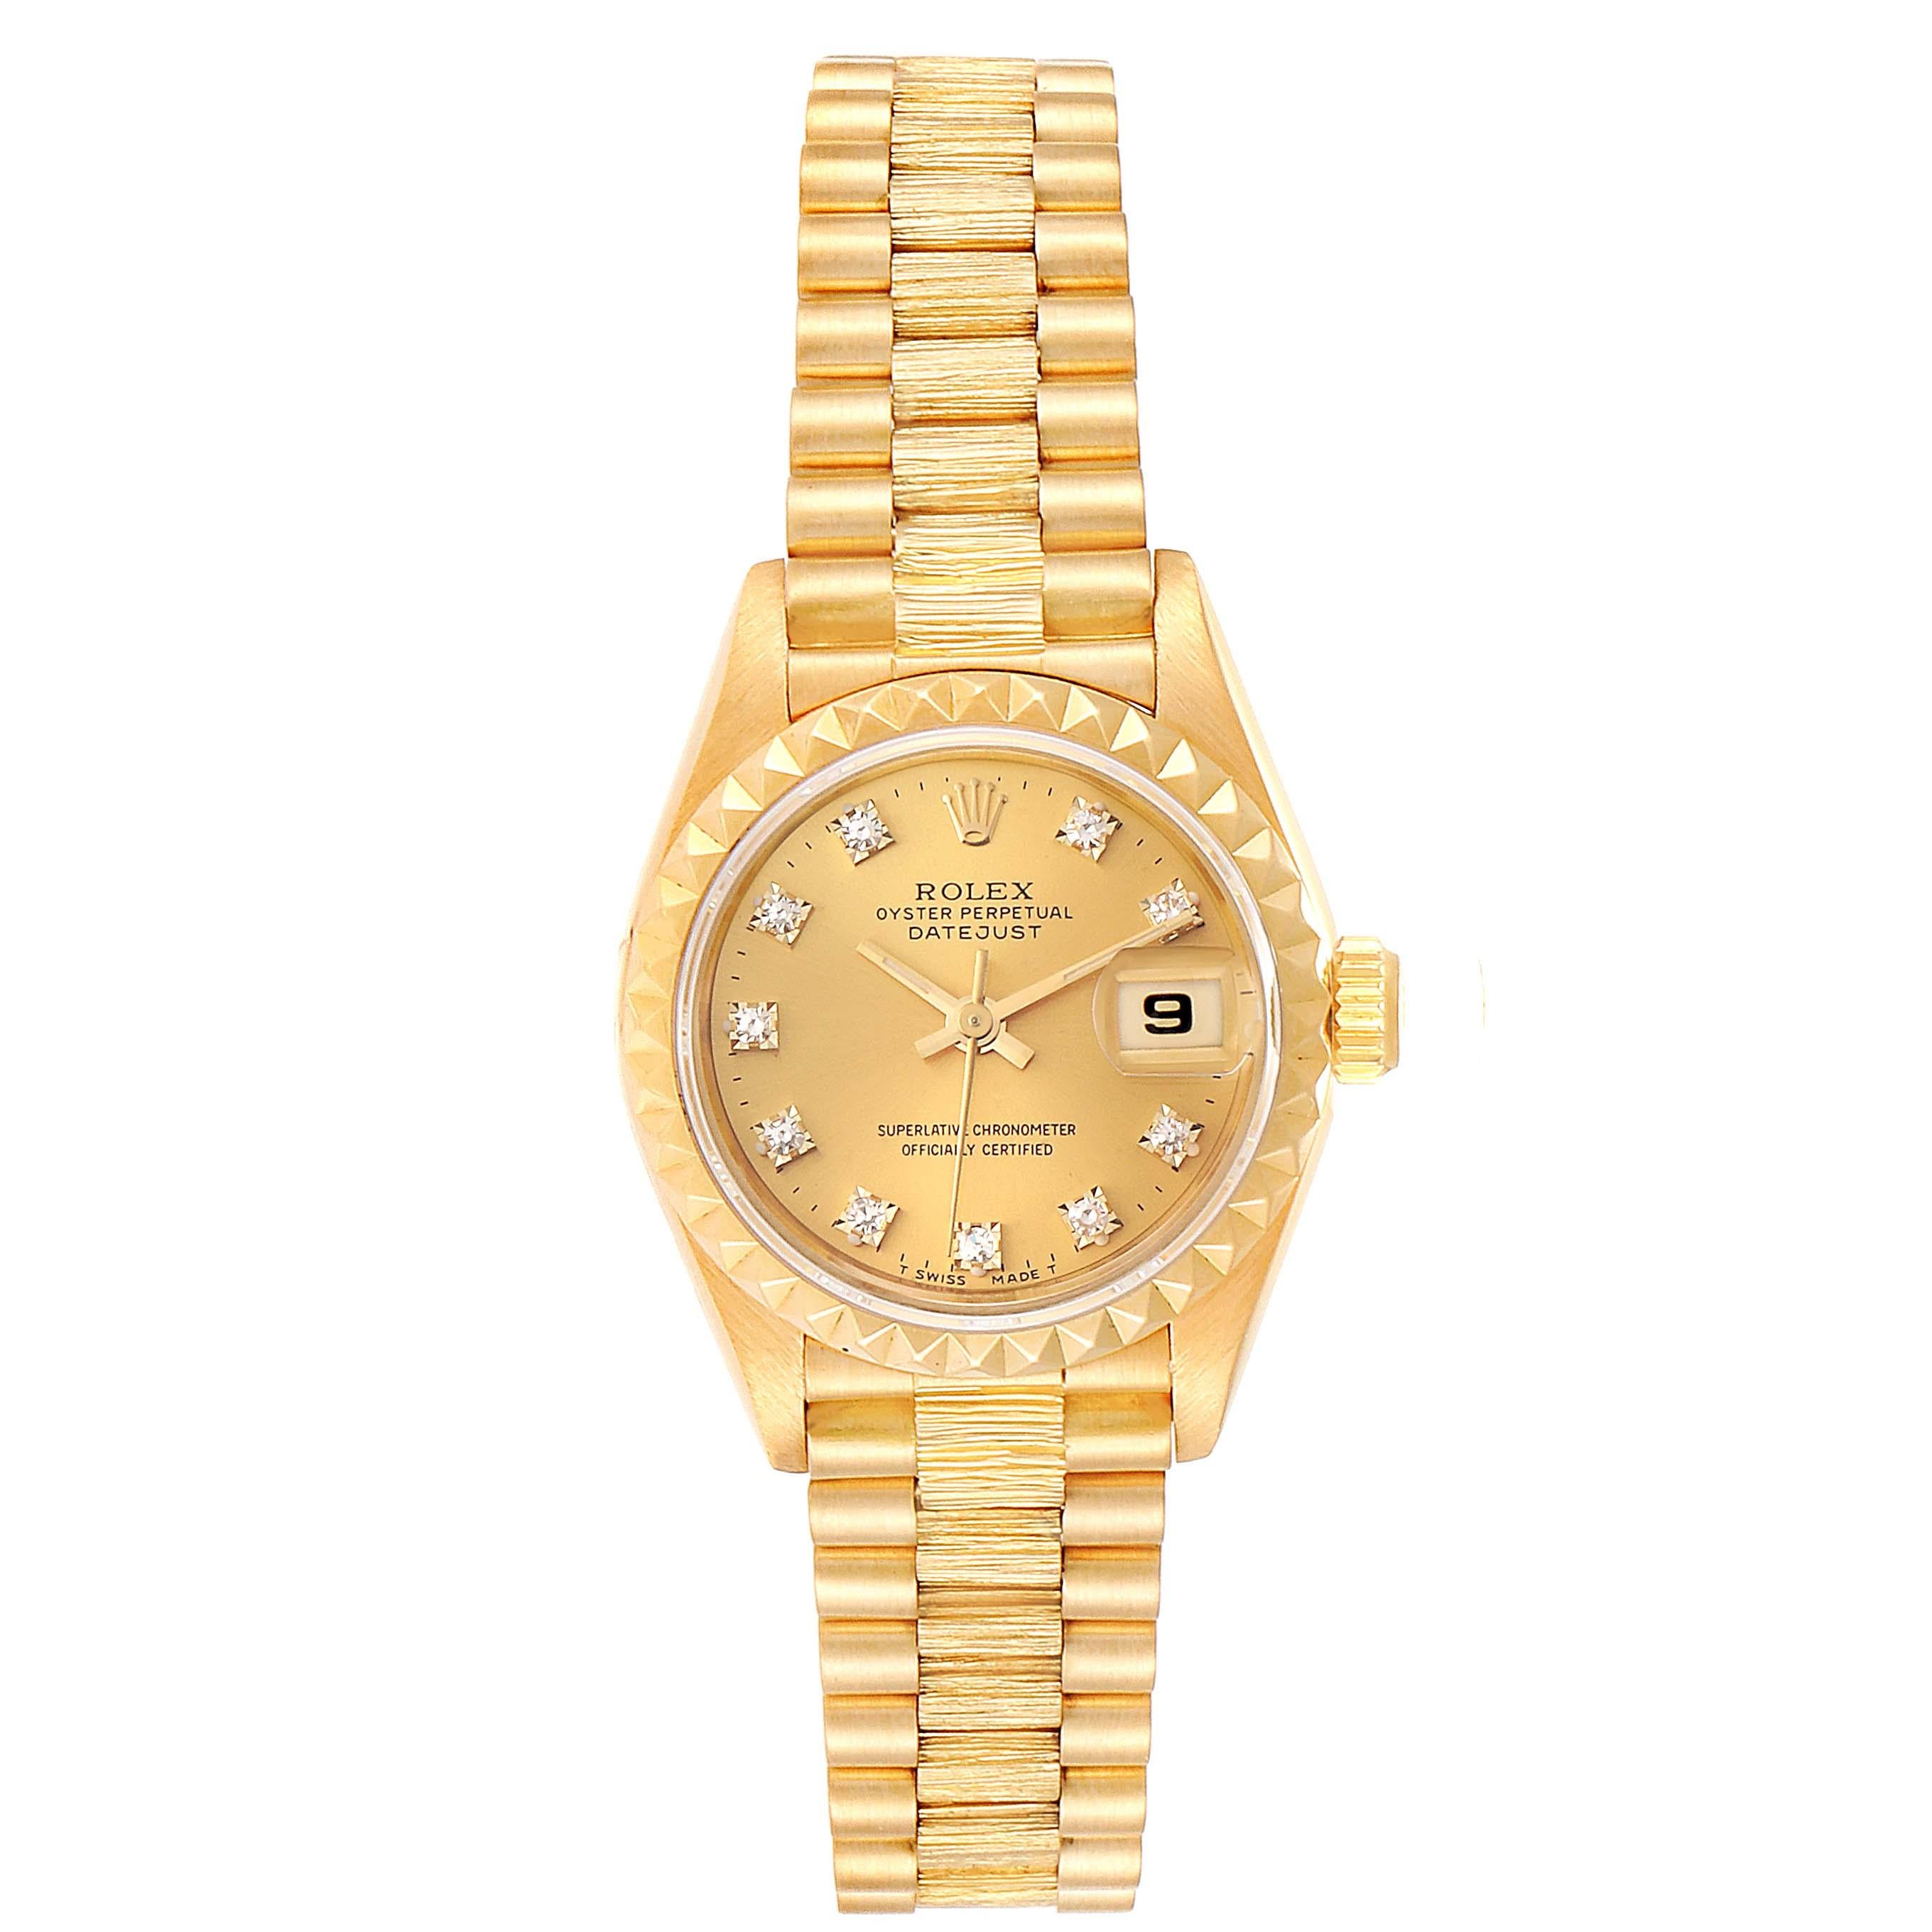 Rolex President Datejust 26 Yellow Gold Diamond Ladies Watch 69278. Officially certified chronometer self-winding movement. 18k yellow gold oyster case 26.0 mm in diameter. Rolex logo on a crown. 18k yellow gold pyramid bezel. Scratch resistant